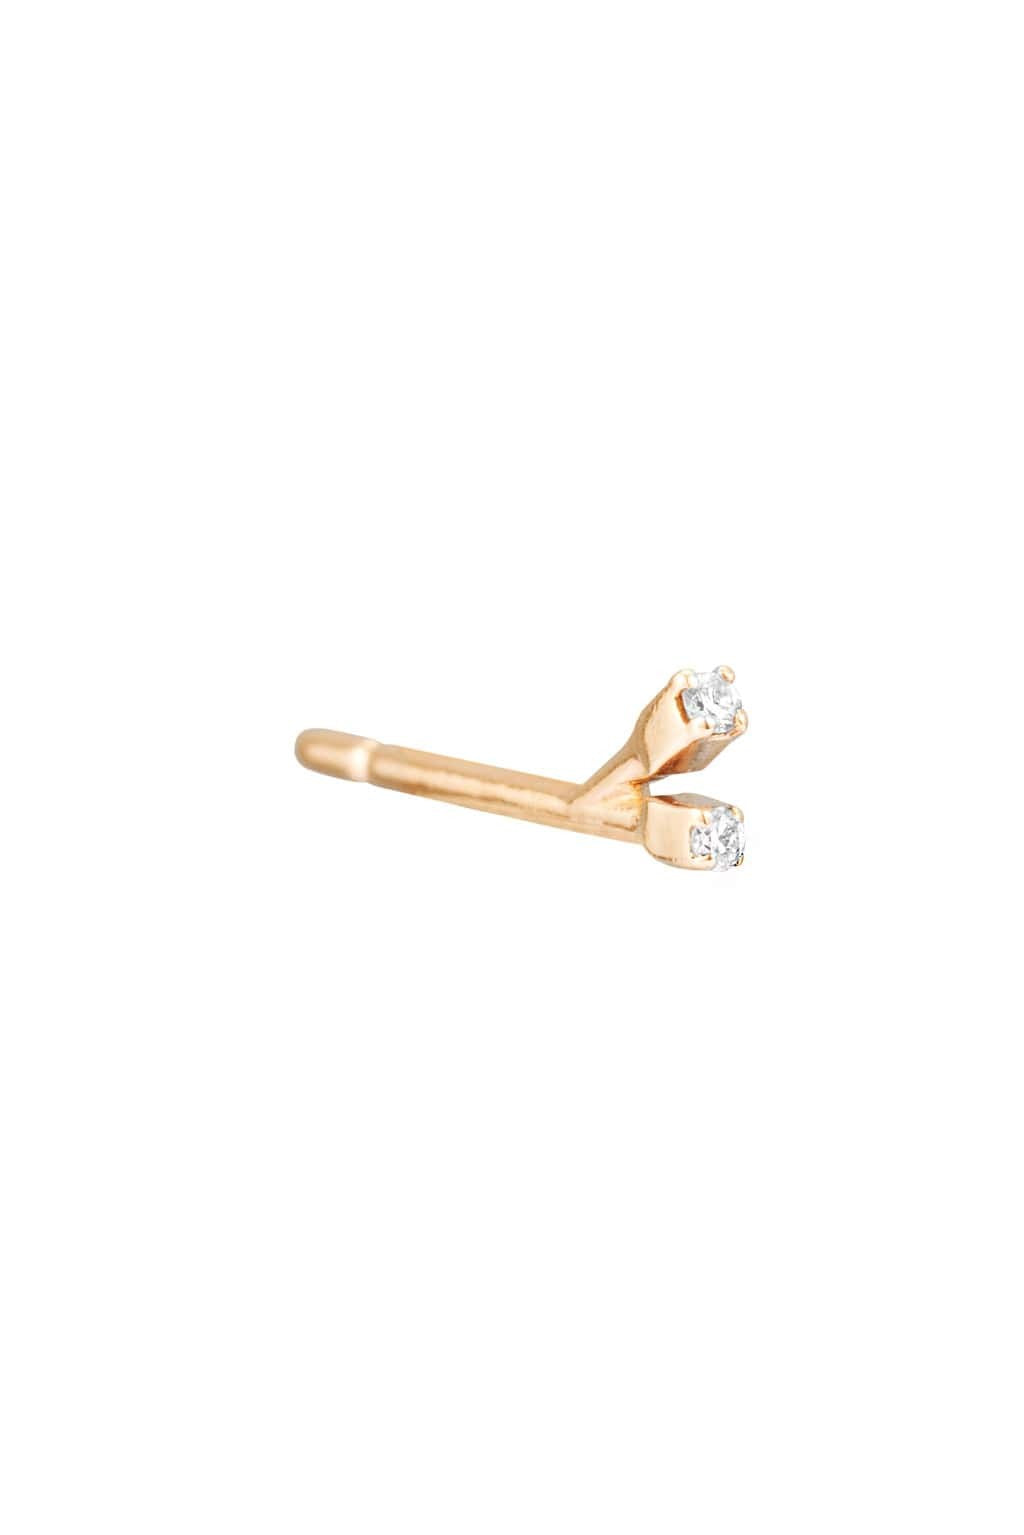 Two Sparks yellow gold earring